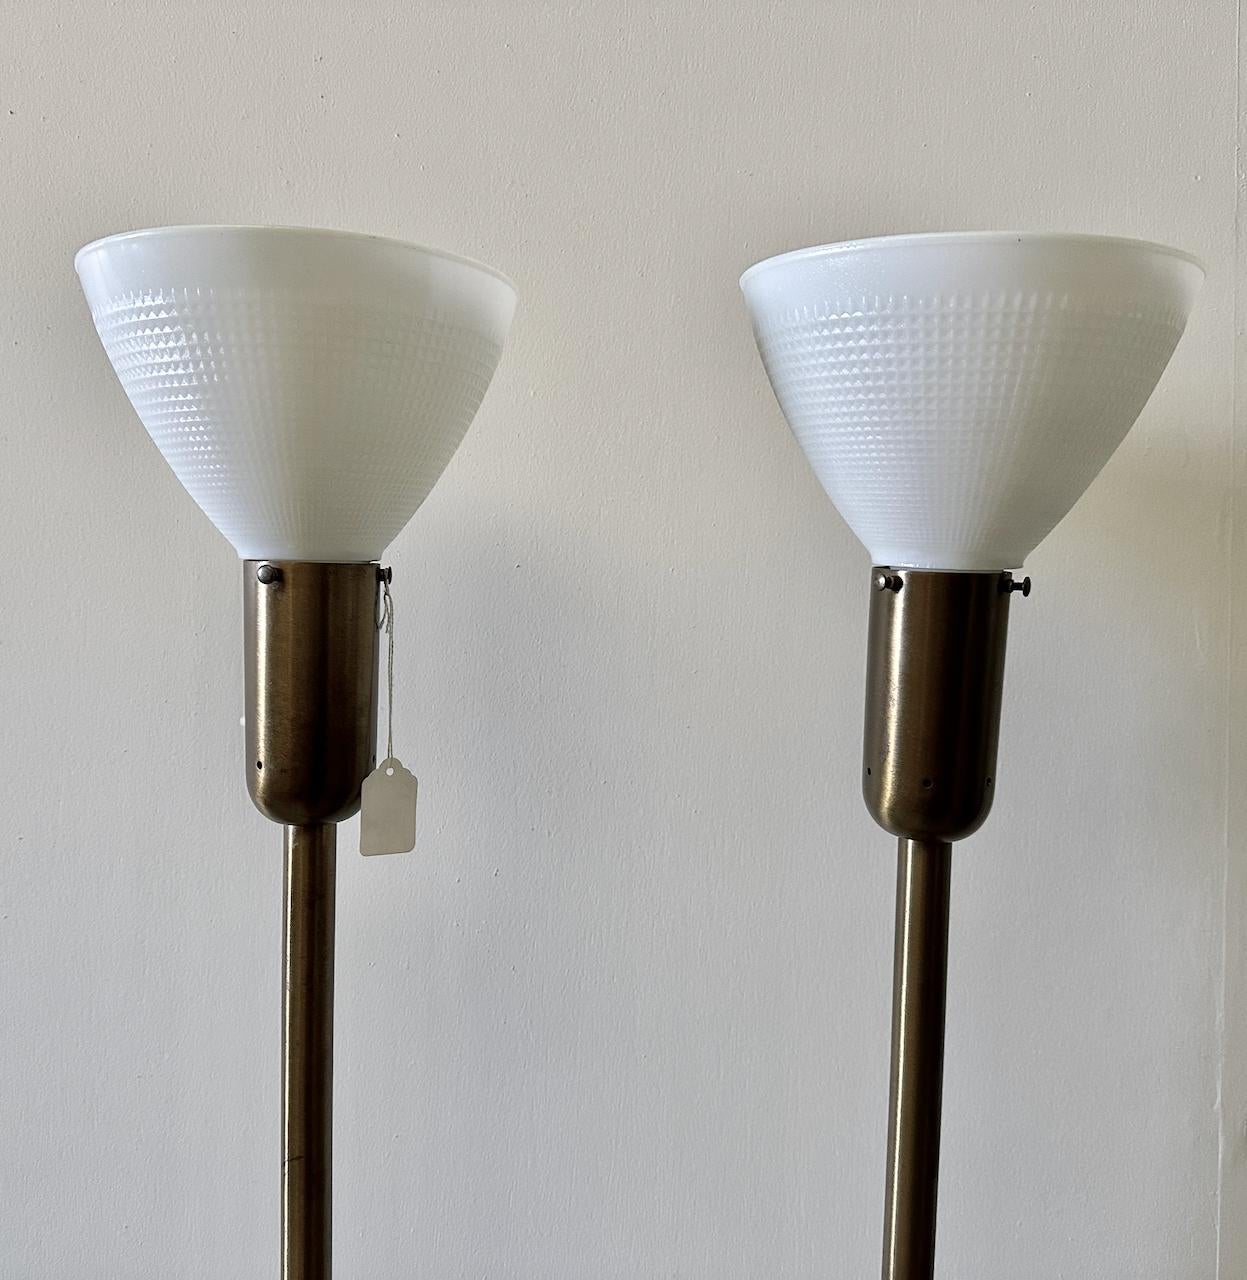 Pair Nessen Studios 907 Brass Floor Lamps with Milk Glass Shades 1940s For Sale 1